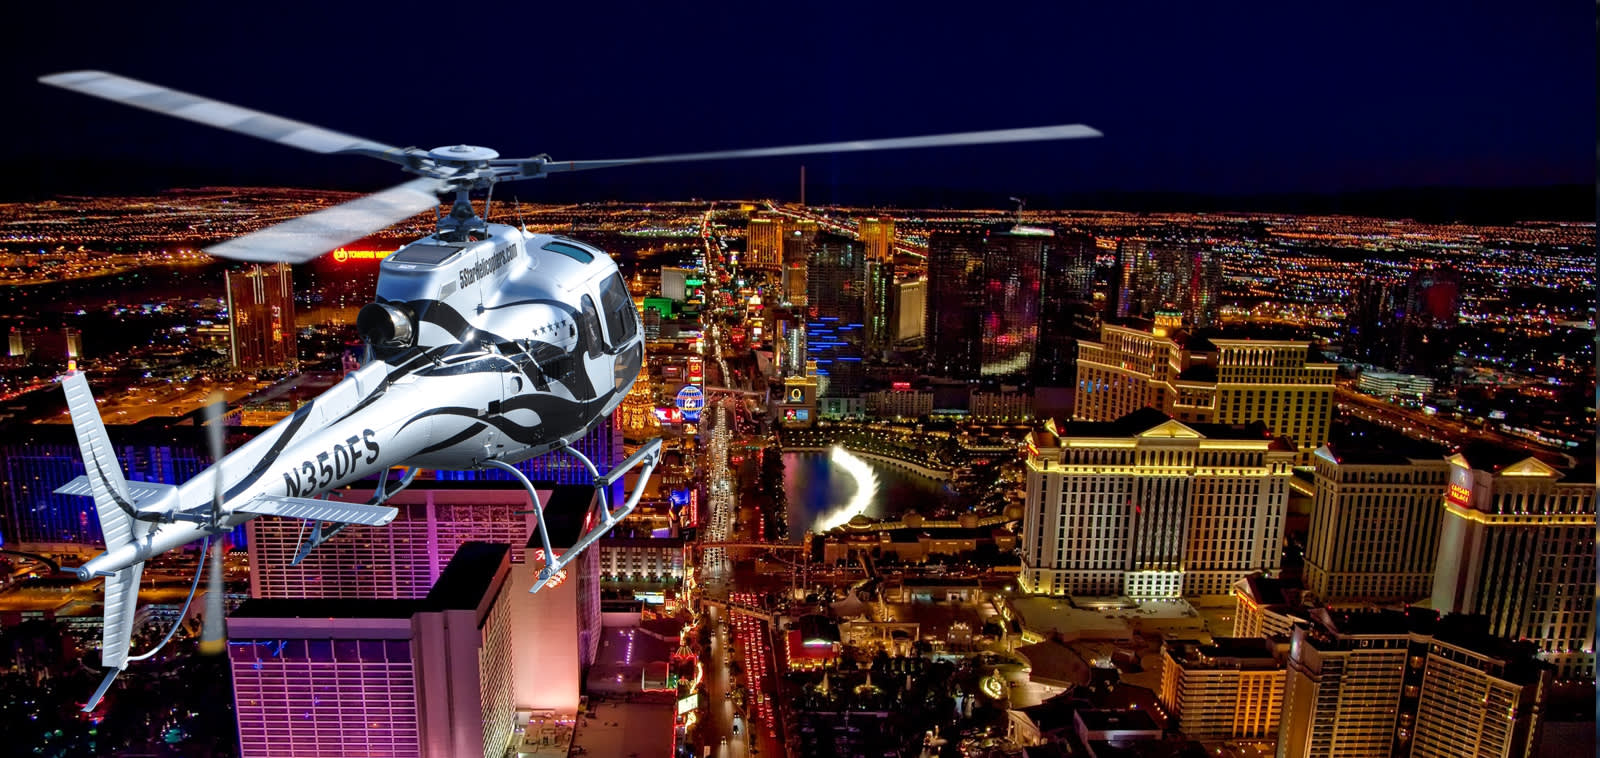 elebrate your stay with a private Las Vegas helicopter strip flight including Cadillac Escalade hotel transfers over the stunning Las Vegas City lights!